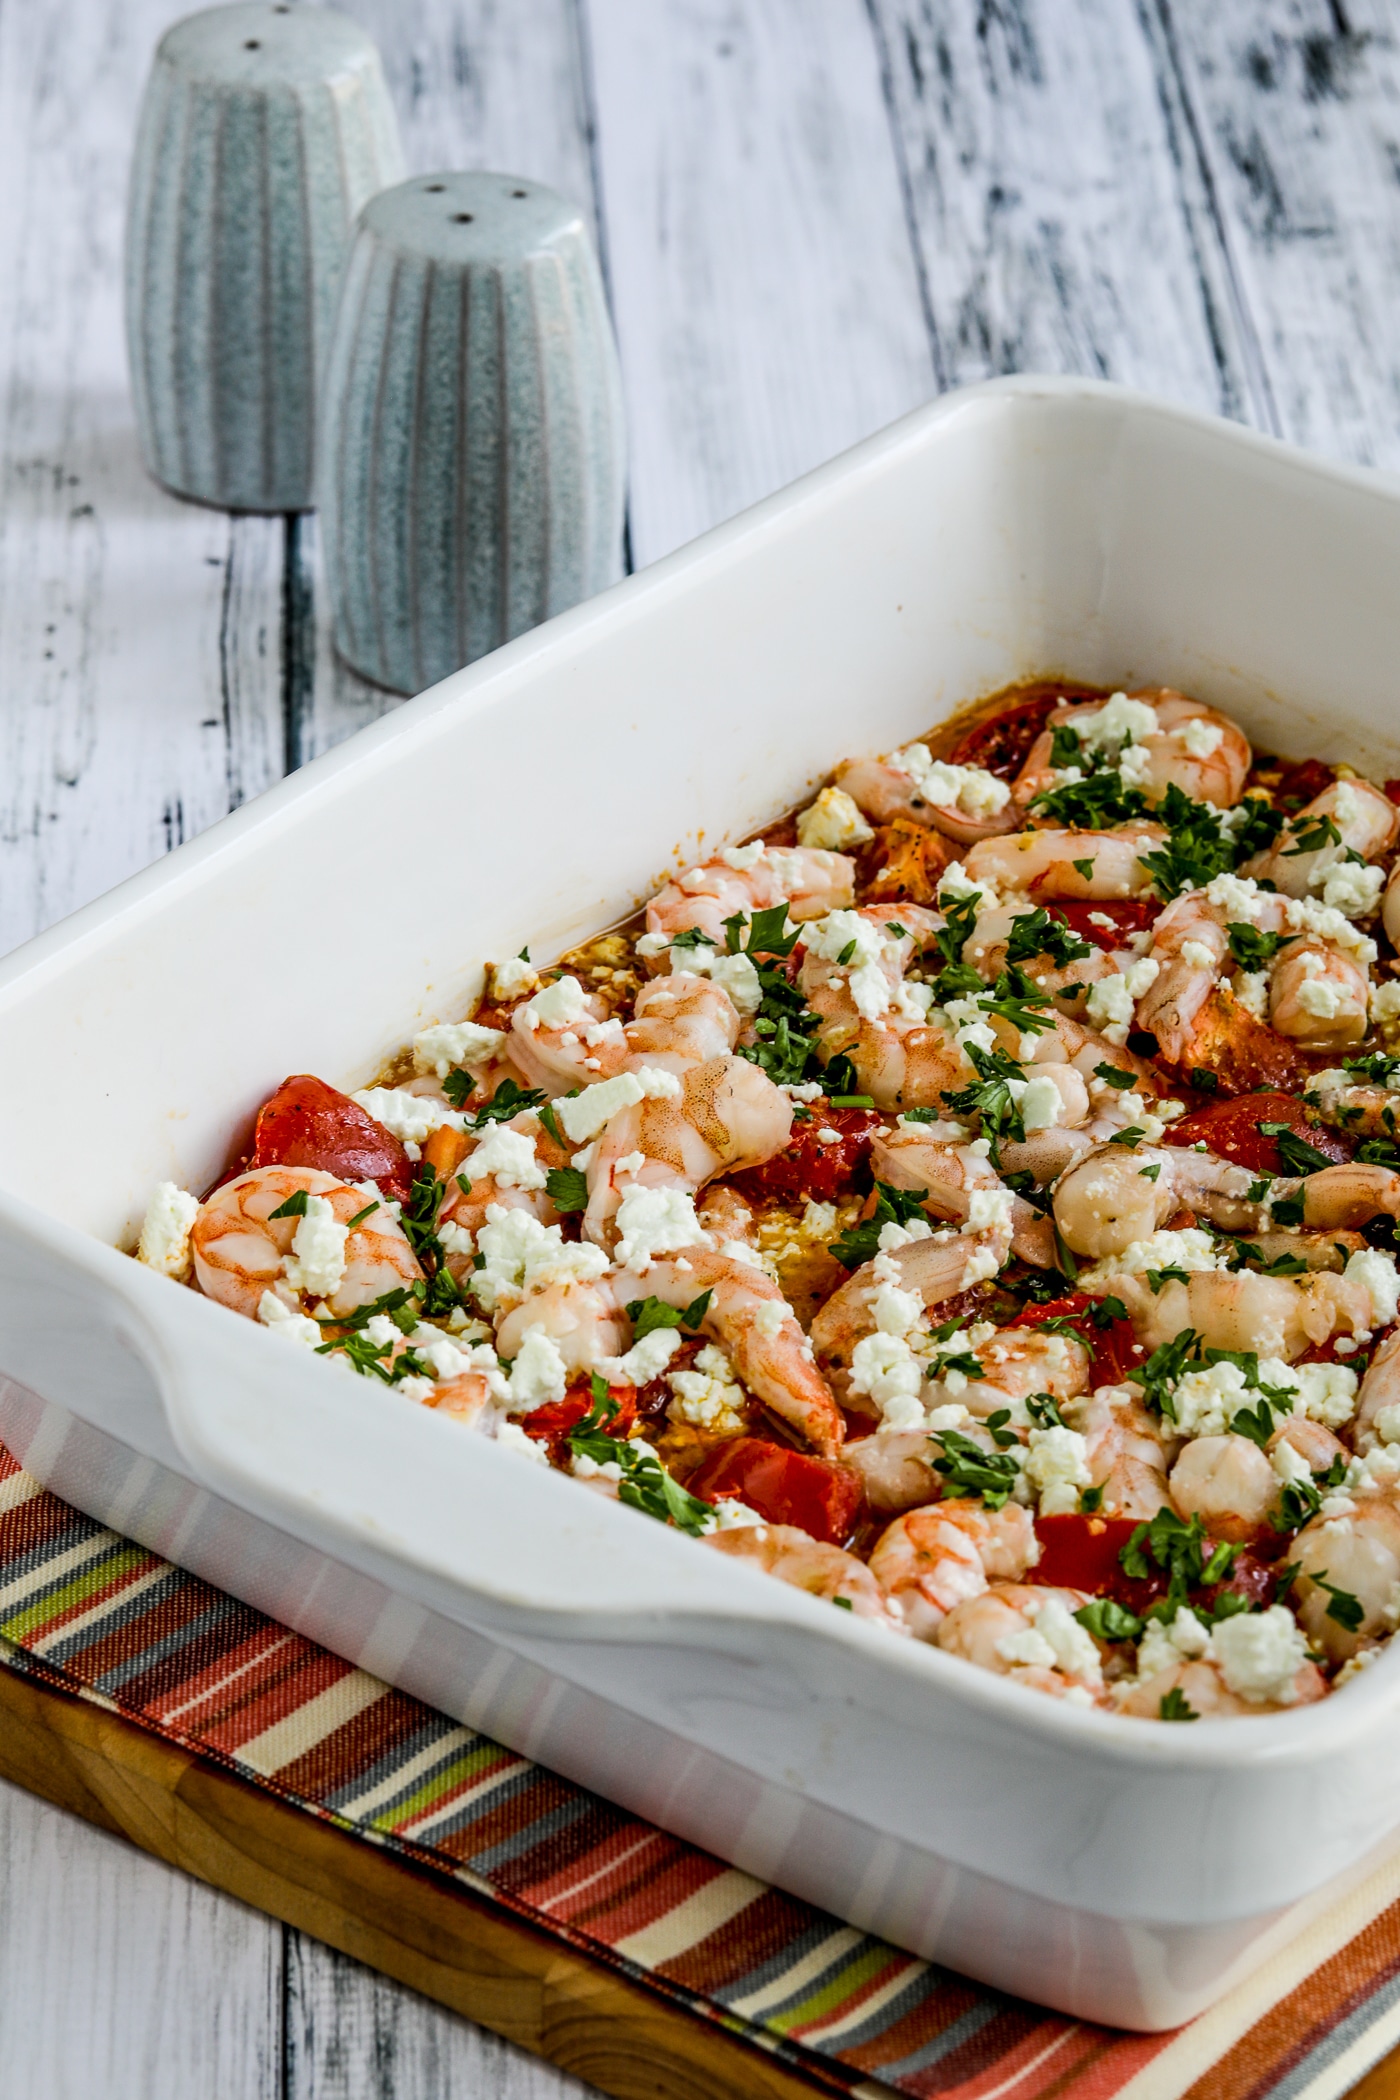 Roasted tomatoes and prawns with feta shown in a serving dish after cooking